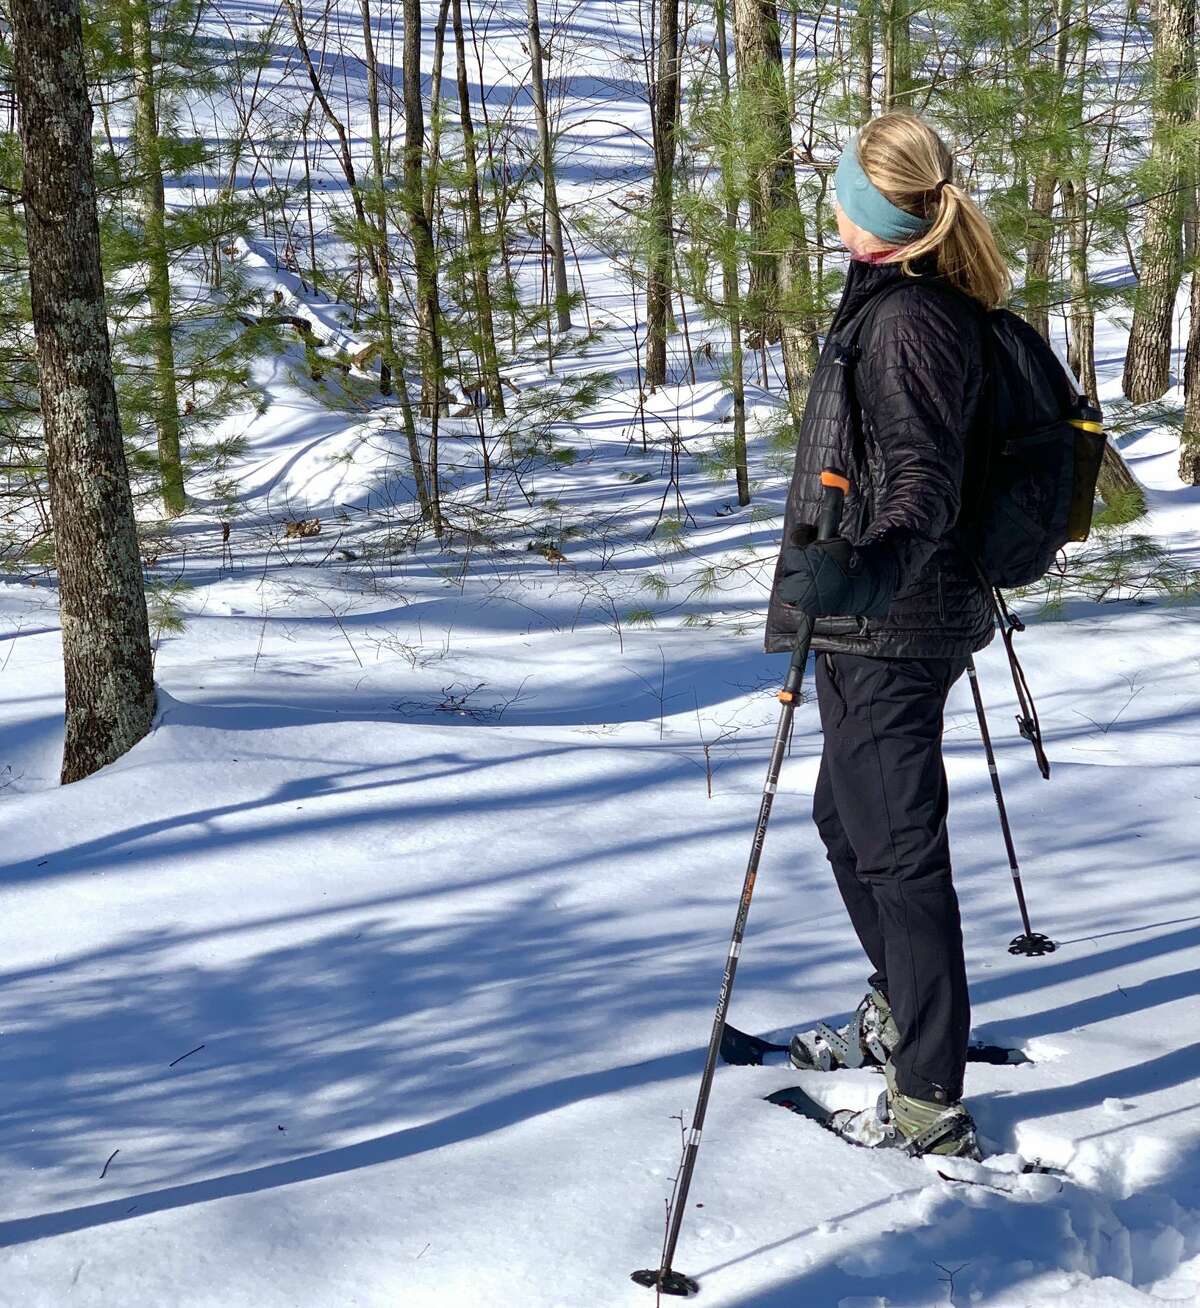 In fresh snow, snowshoeing feels like floating, as if you’re hovering a bit above the terrain.